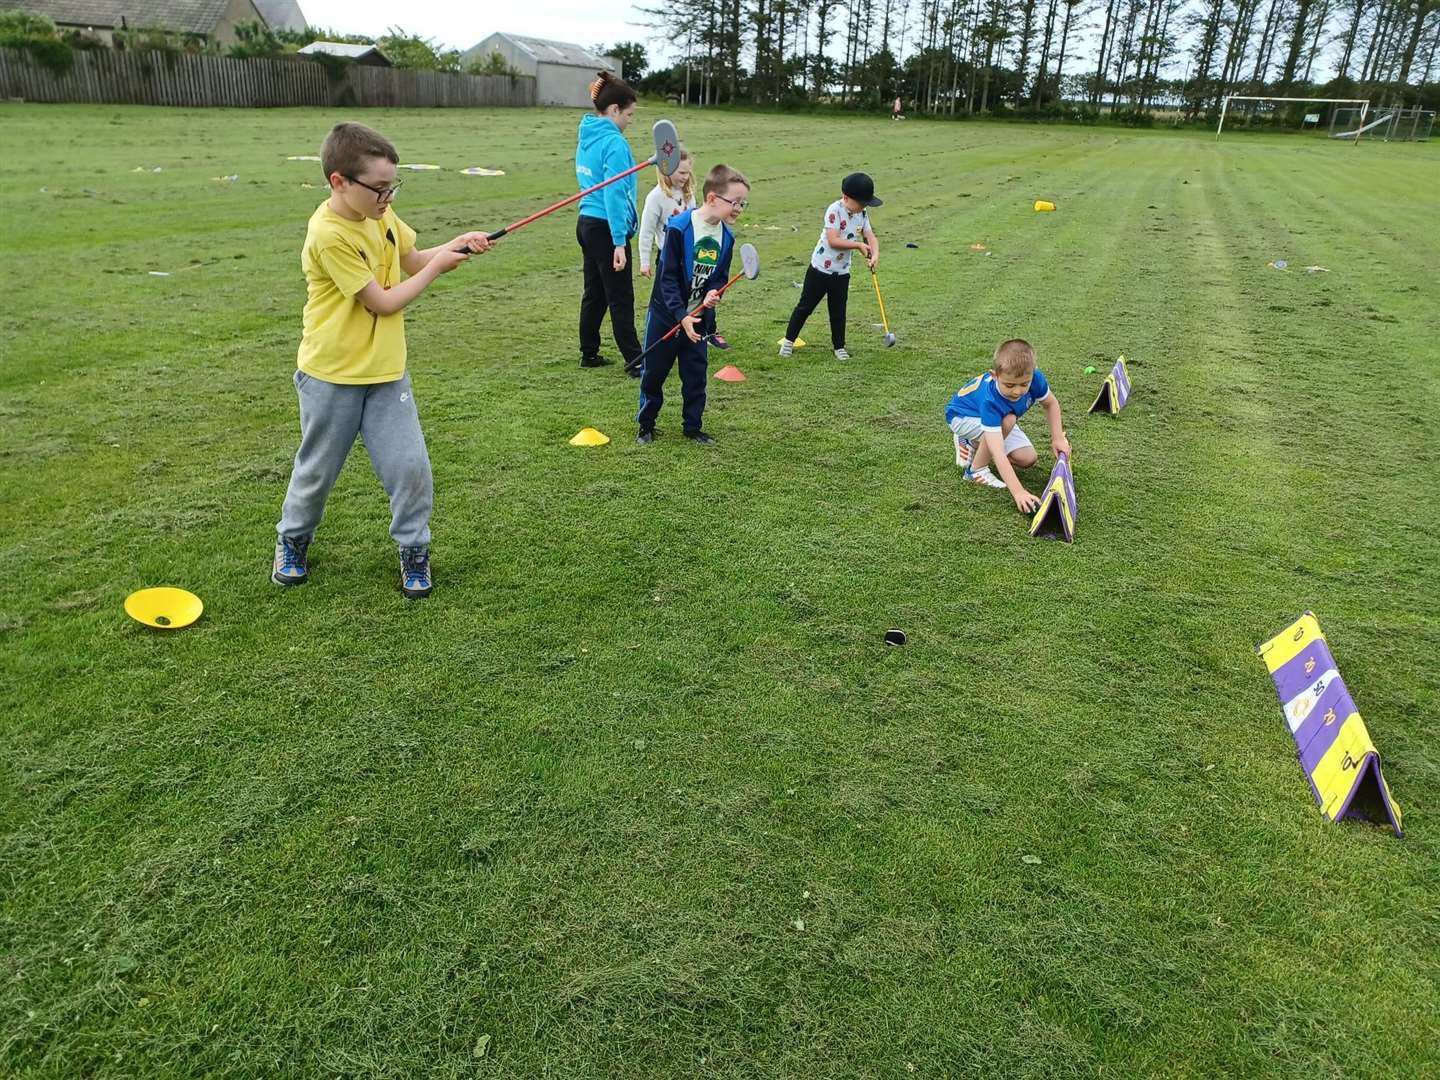 These children give golf a go.